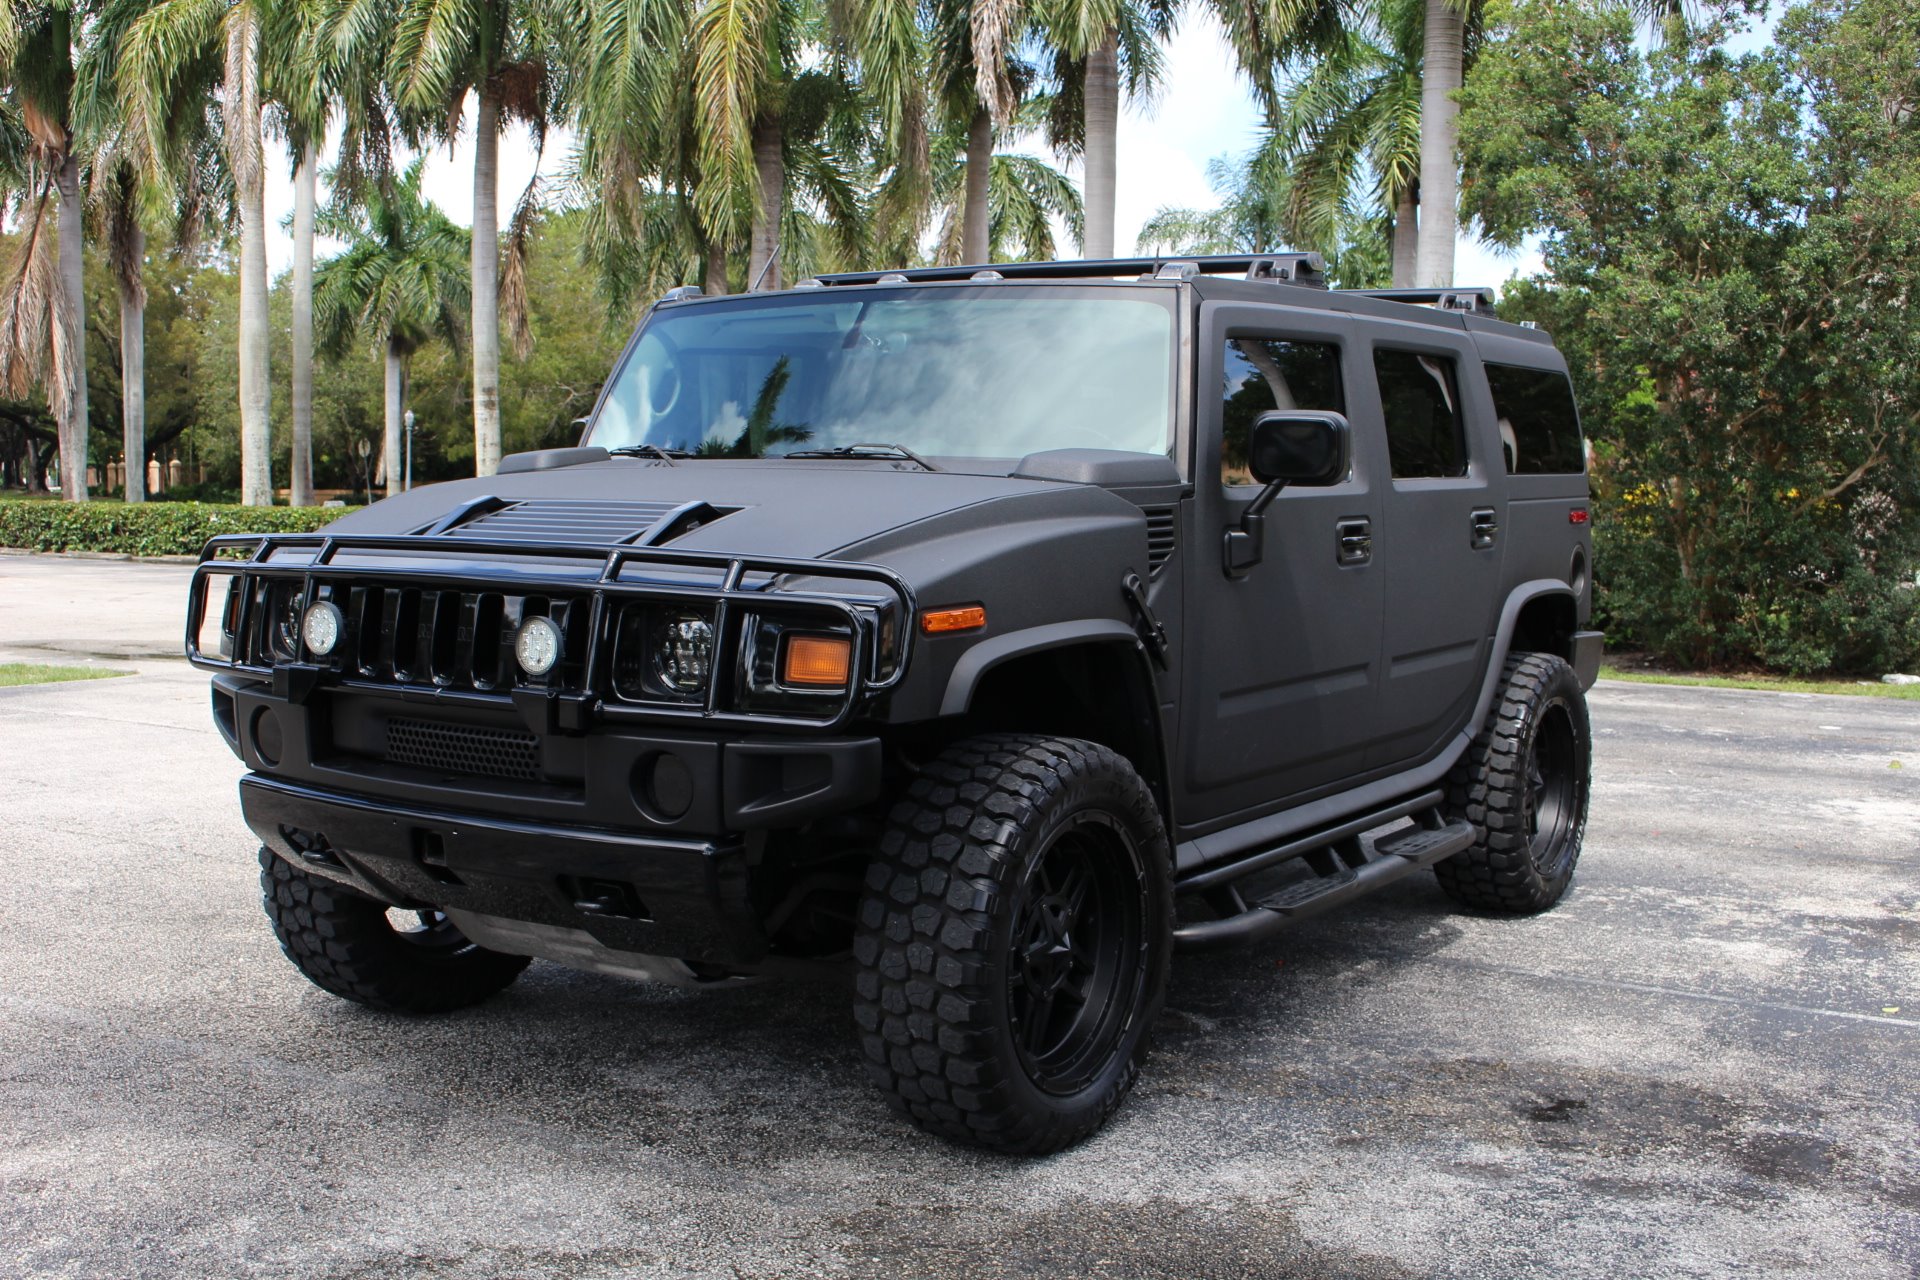 Used 2003 HUMMER H2 Lux Series For Sale ($28,850) | The Gables Sports ...